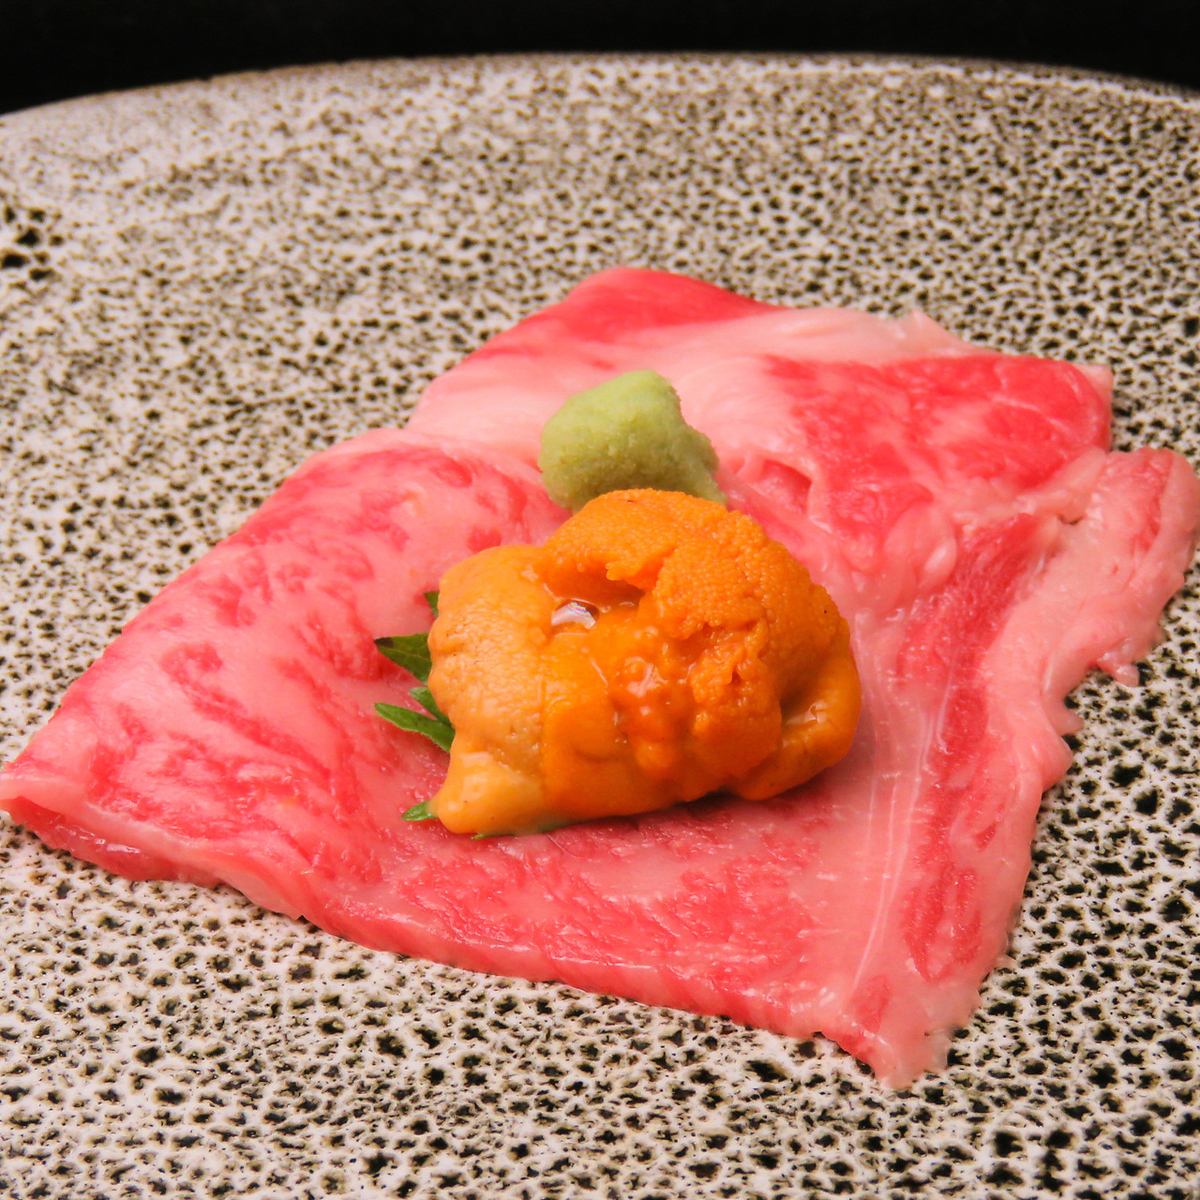 We also have a wide variety of Wagyu beef, such as Awa Beef × Rich Uni-no-uniku and Awa Beef Nigiri.